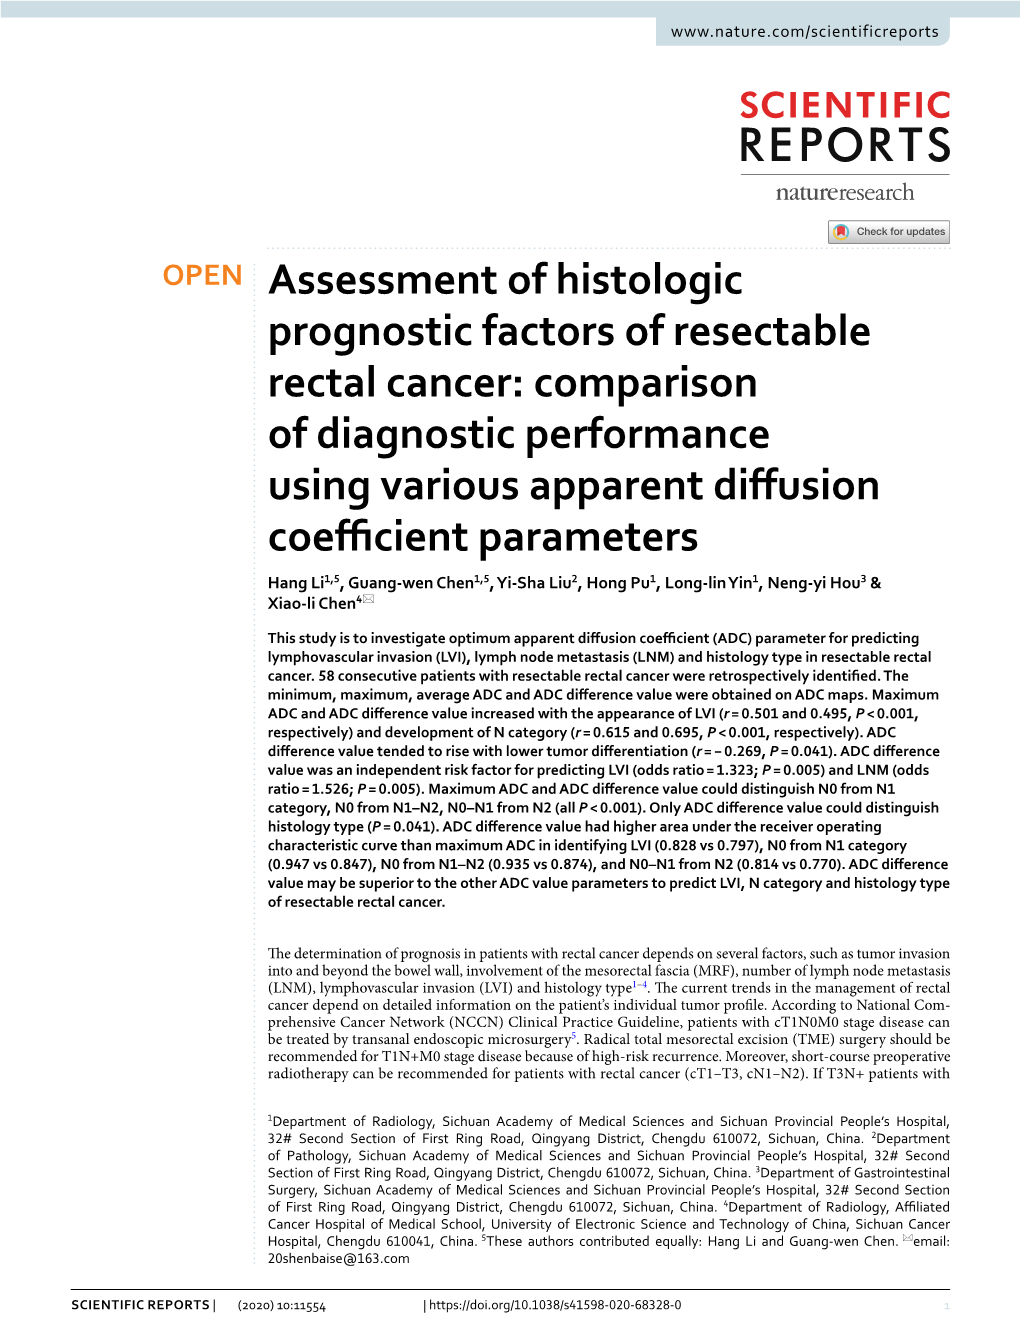 Assessment of Histologic Prognostic Factors of Resectable Rectal